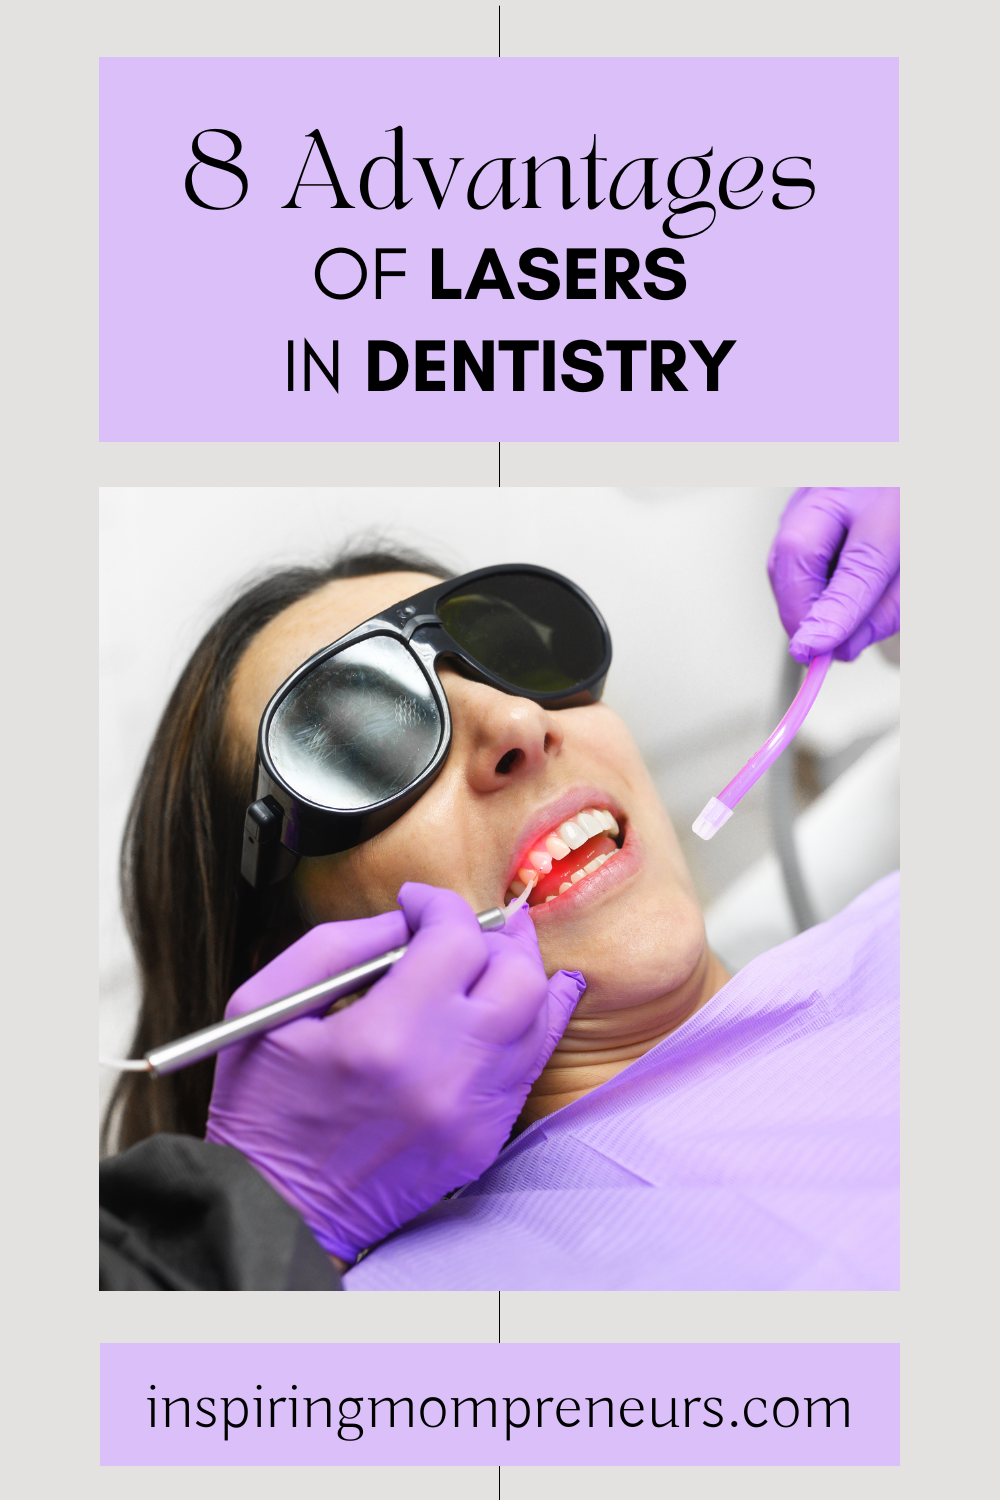 What Are the Advantages of Lasers in Dentistry? | Advantages of Lasers in Dentistry pin